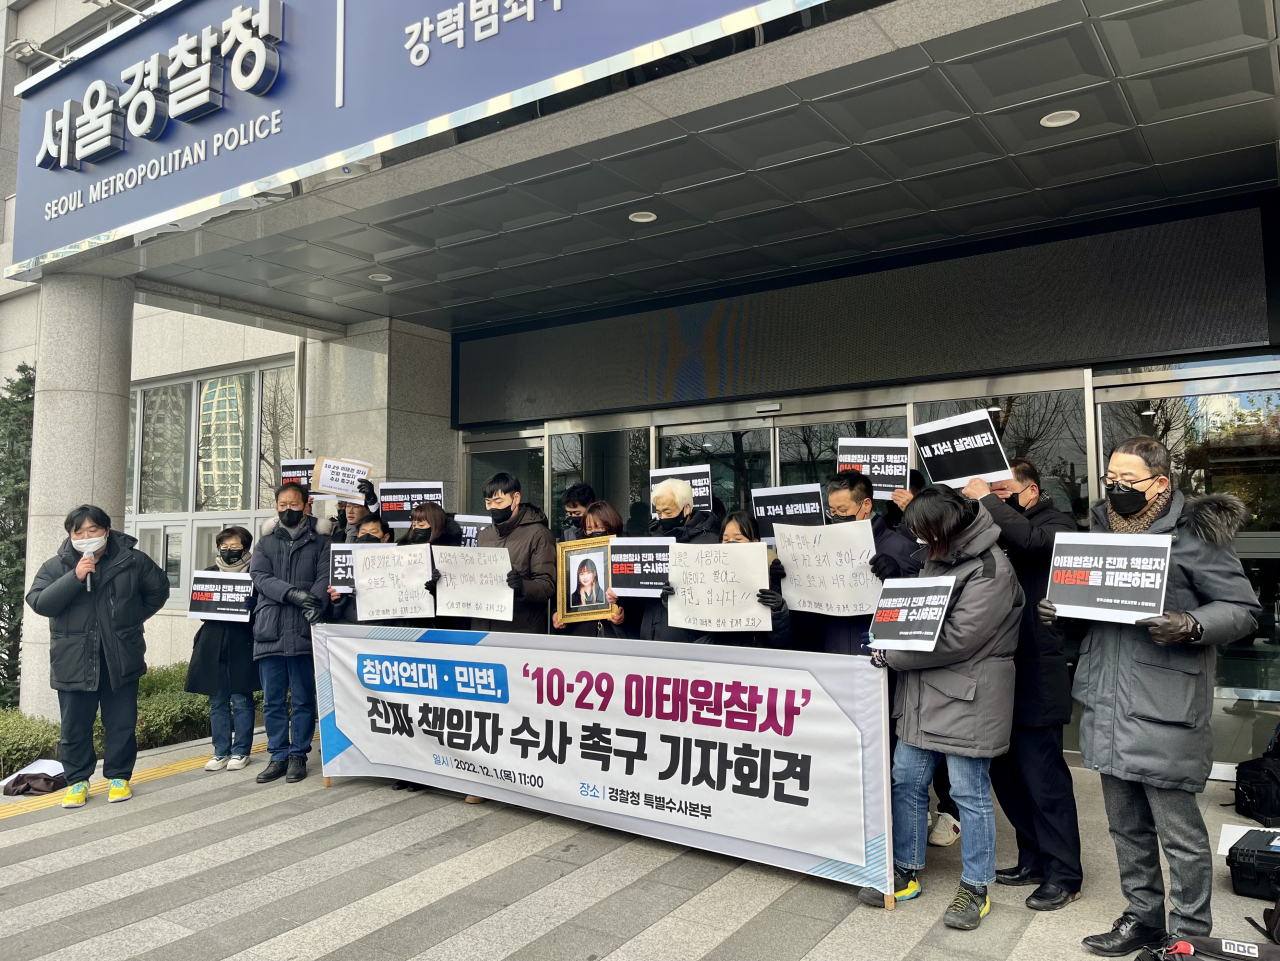 The bereaved families of the victims of the crowd crush in Seoul’s Itaewon last month speak outside the Seoul metropolitan police office on Thursday. The man speaking with a microphone (farthest left) is Suh Chae-wan, one of the lawyers at Minbyun working with the families. (Kim Arin/The Korea Herald)